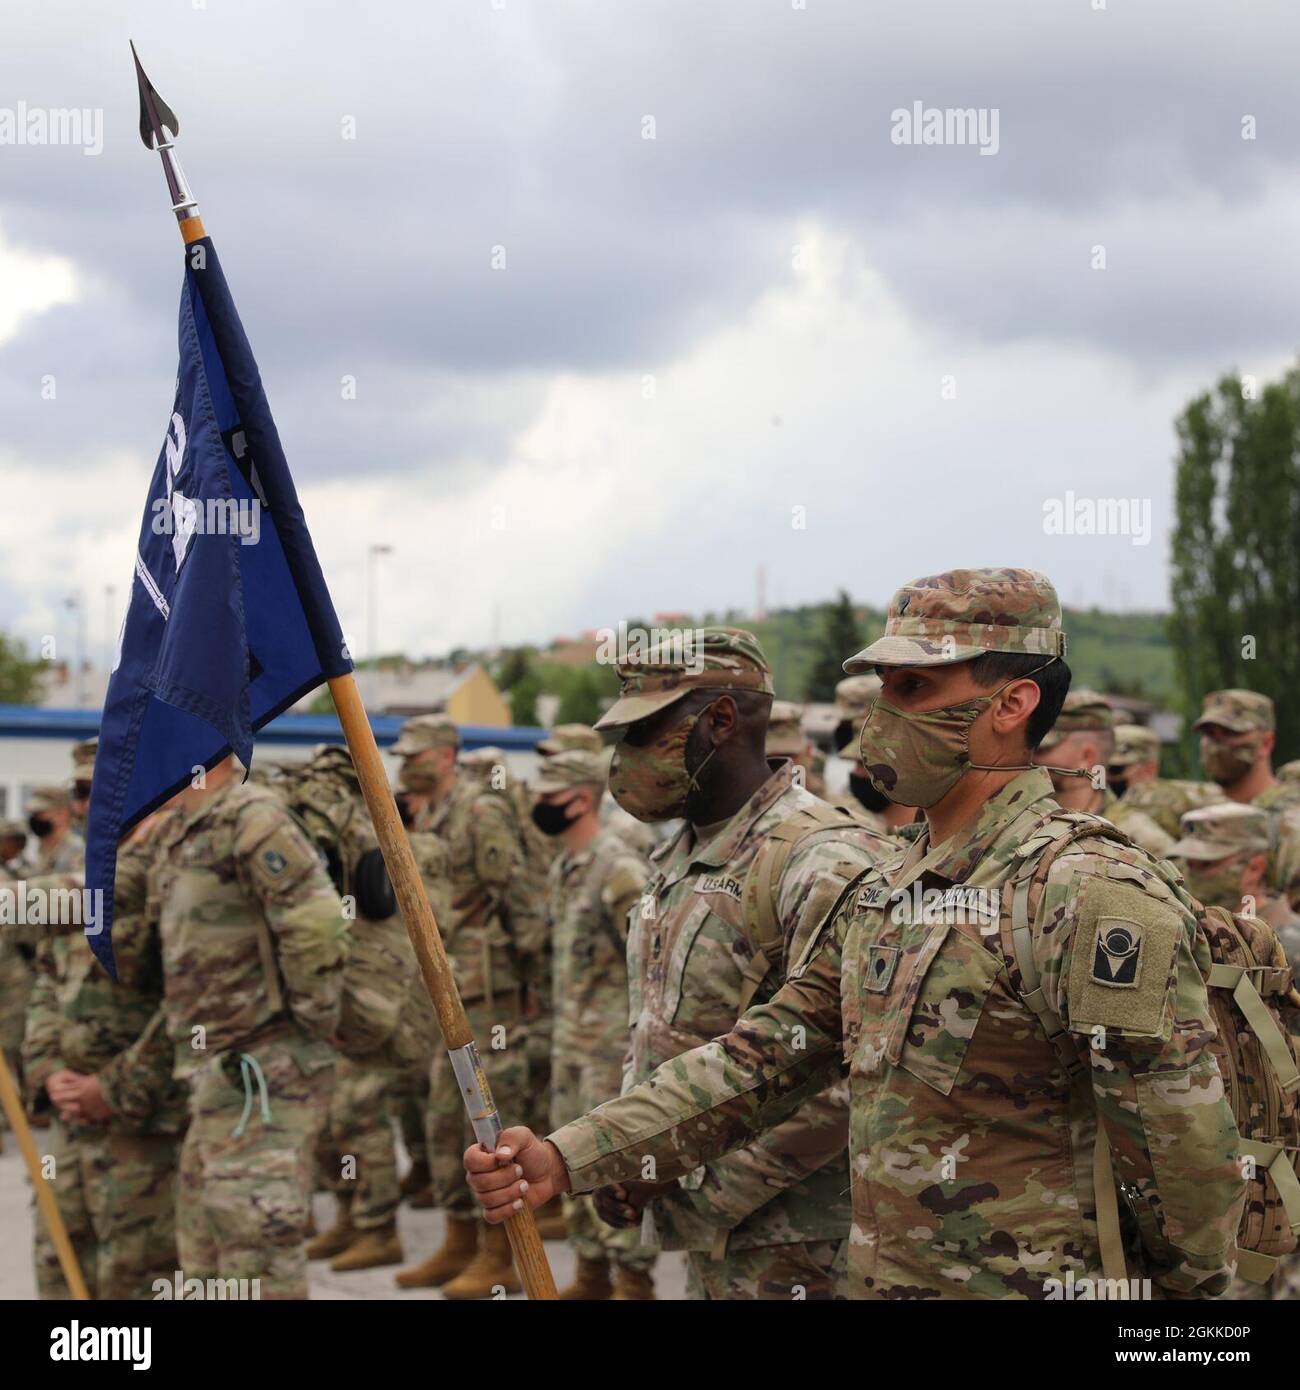 Soldiers from the Florida Army National Guard’s 2nd Battalion, 124th Infantry Regiment, 53rd Infantry Brigade Combat Team, stand in formation and display their guidon after arriving in Sarajevo, Bosnia and Herzegovina (BiH), May 15, 2021. Immediate Response 21 is a logistics-focused exercise designed to test and improve moving forces and equipment rapidly from one location to another by both BiH Armed Forces and U.S. Armed Forces. Immediate Response 21 is part of DEFENDER-Europe 21, an extensive multinational exercise designed to ensure that U.S. forces and participating NATO forces are traine Stock Photo